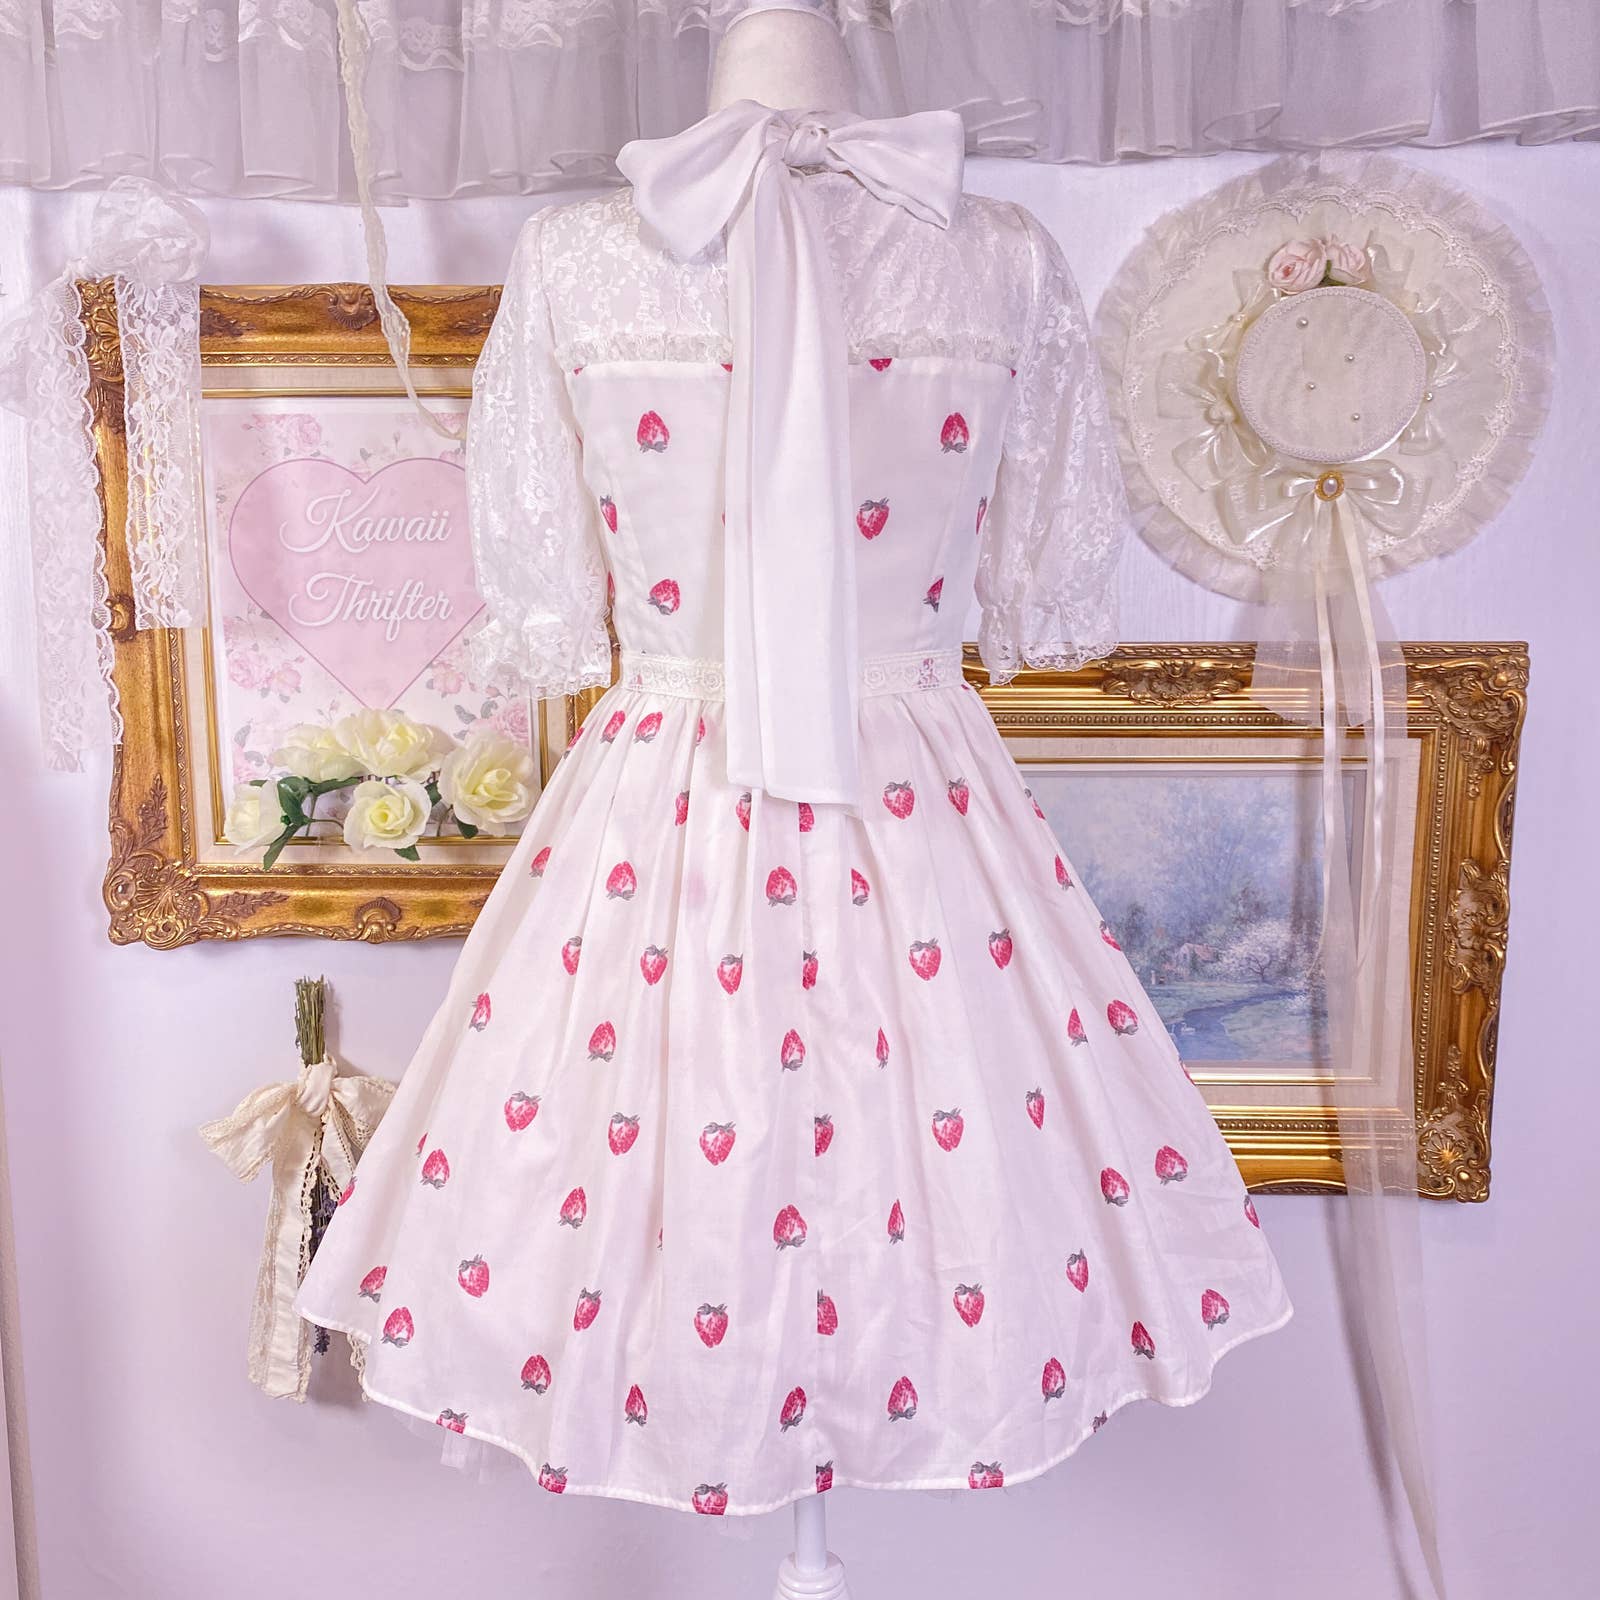 mille fille closet Melty Strawberry スカートミニスカート